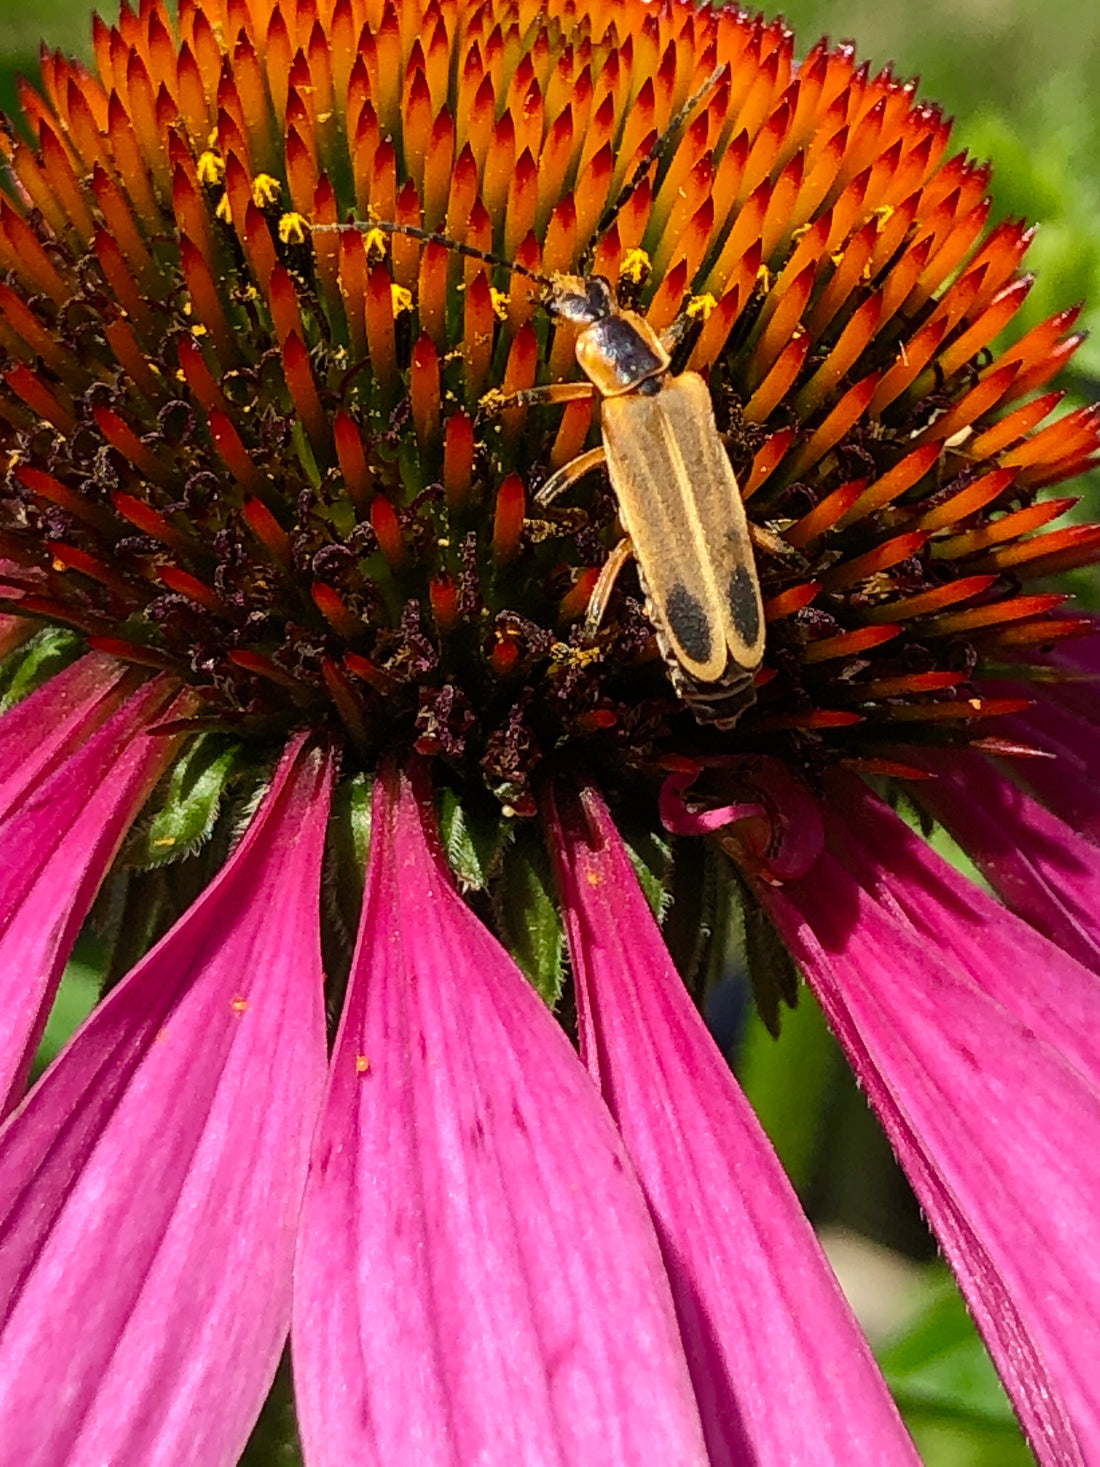 "Nature's Collaboration: Beetle and Echinacea in Symbiotic Dance"